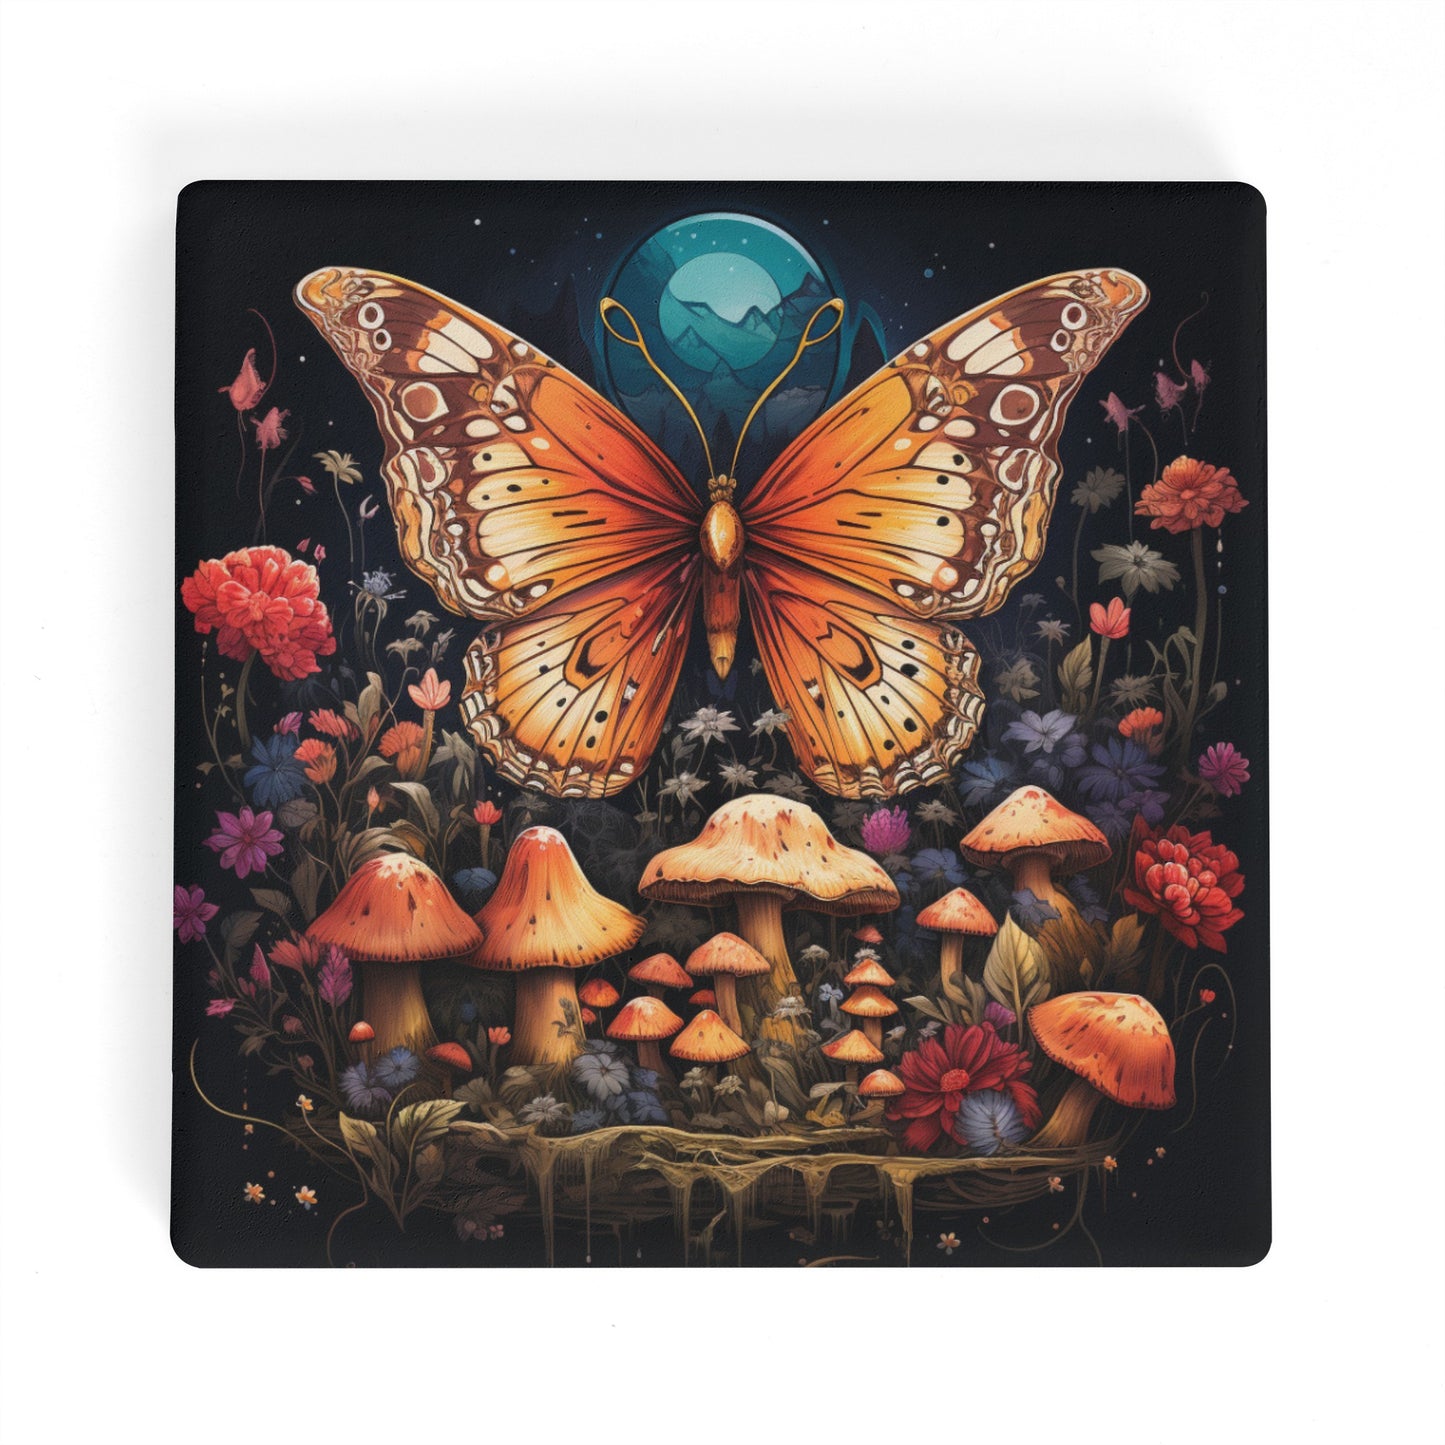 Mystical Butterfly with Mushroom Design Square Ceramic Coasters - Set of 4